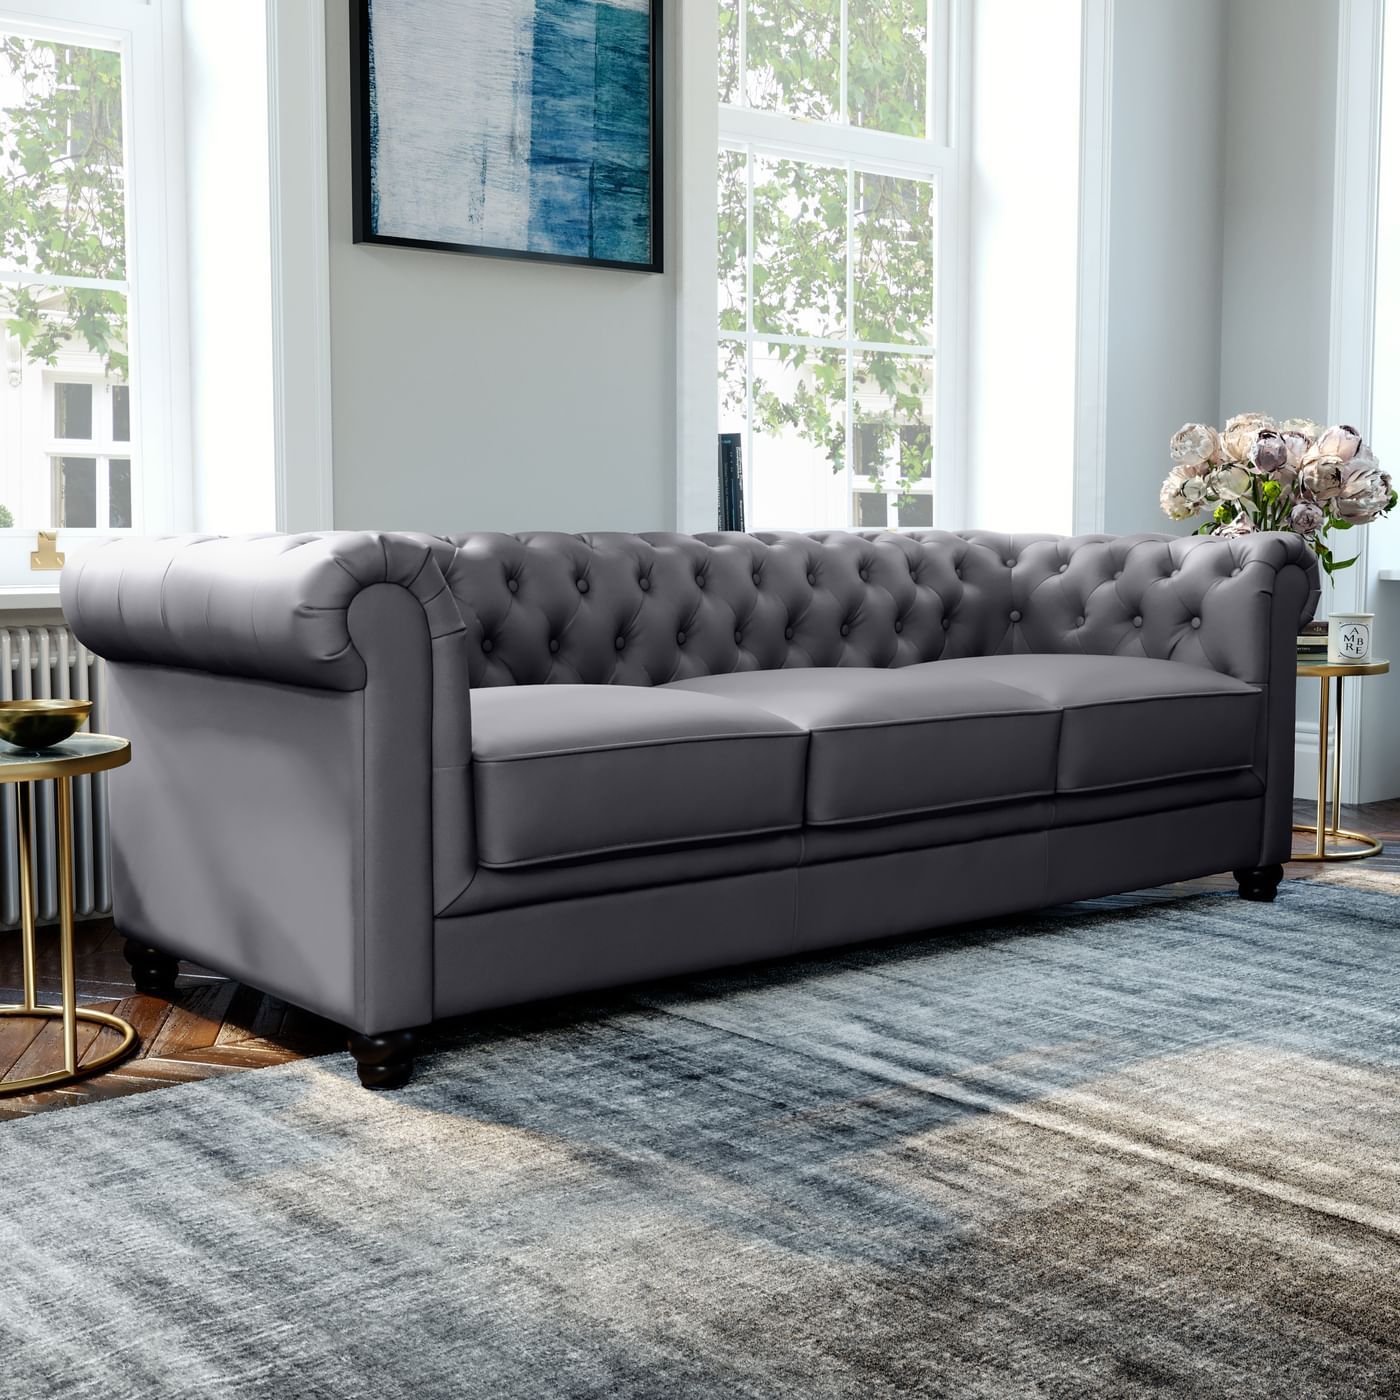 Hampton Grey Leather 3 Seater Chesterfield Sofa | Furniture Choice Inside Chesterfield Sofas (View 20 of 21)